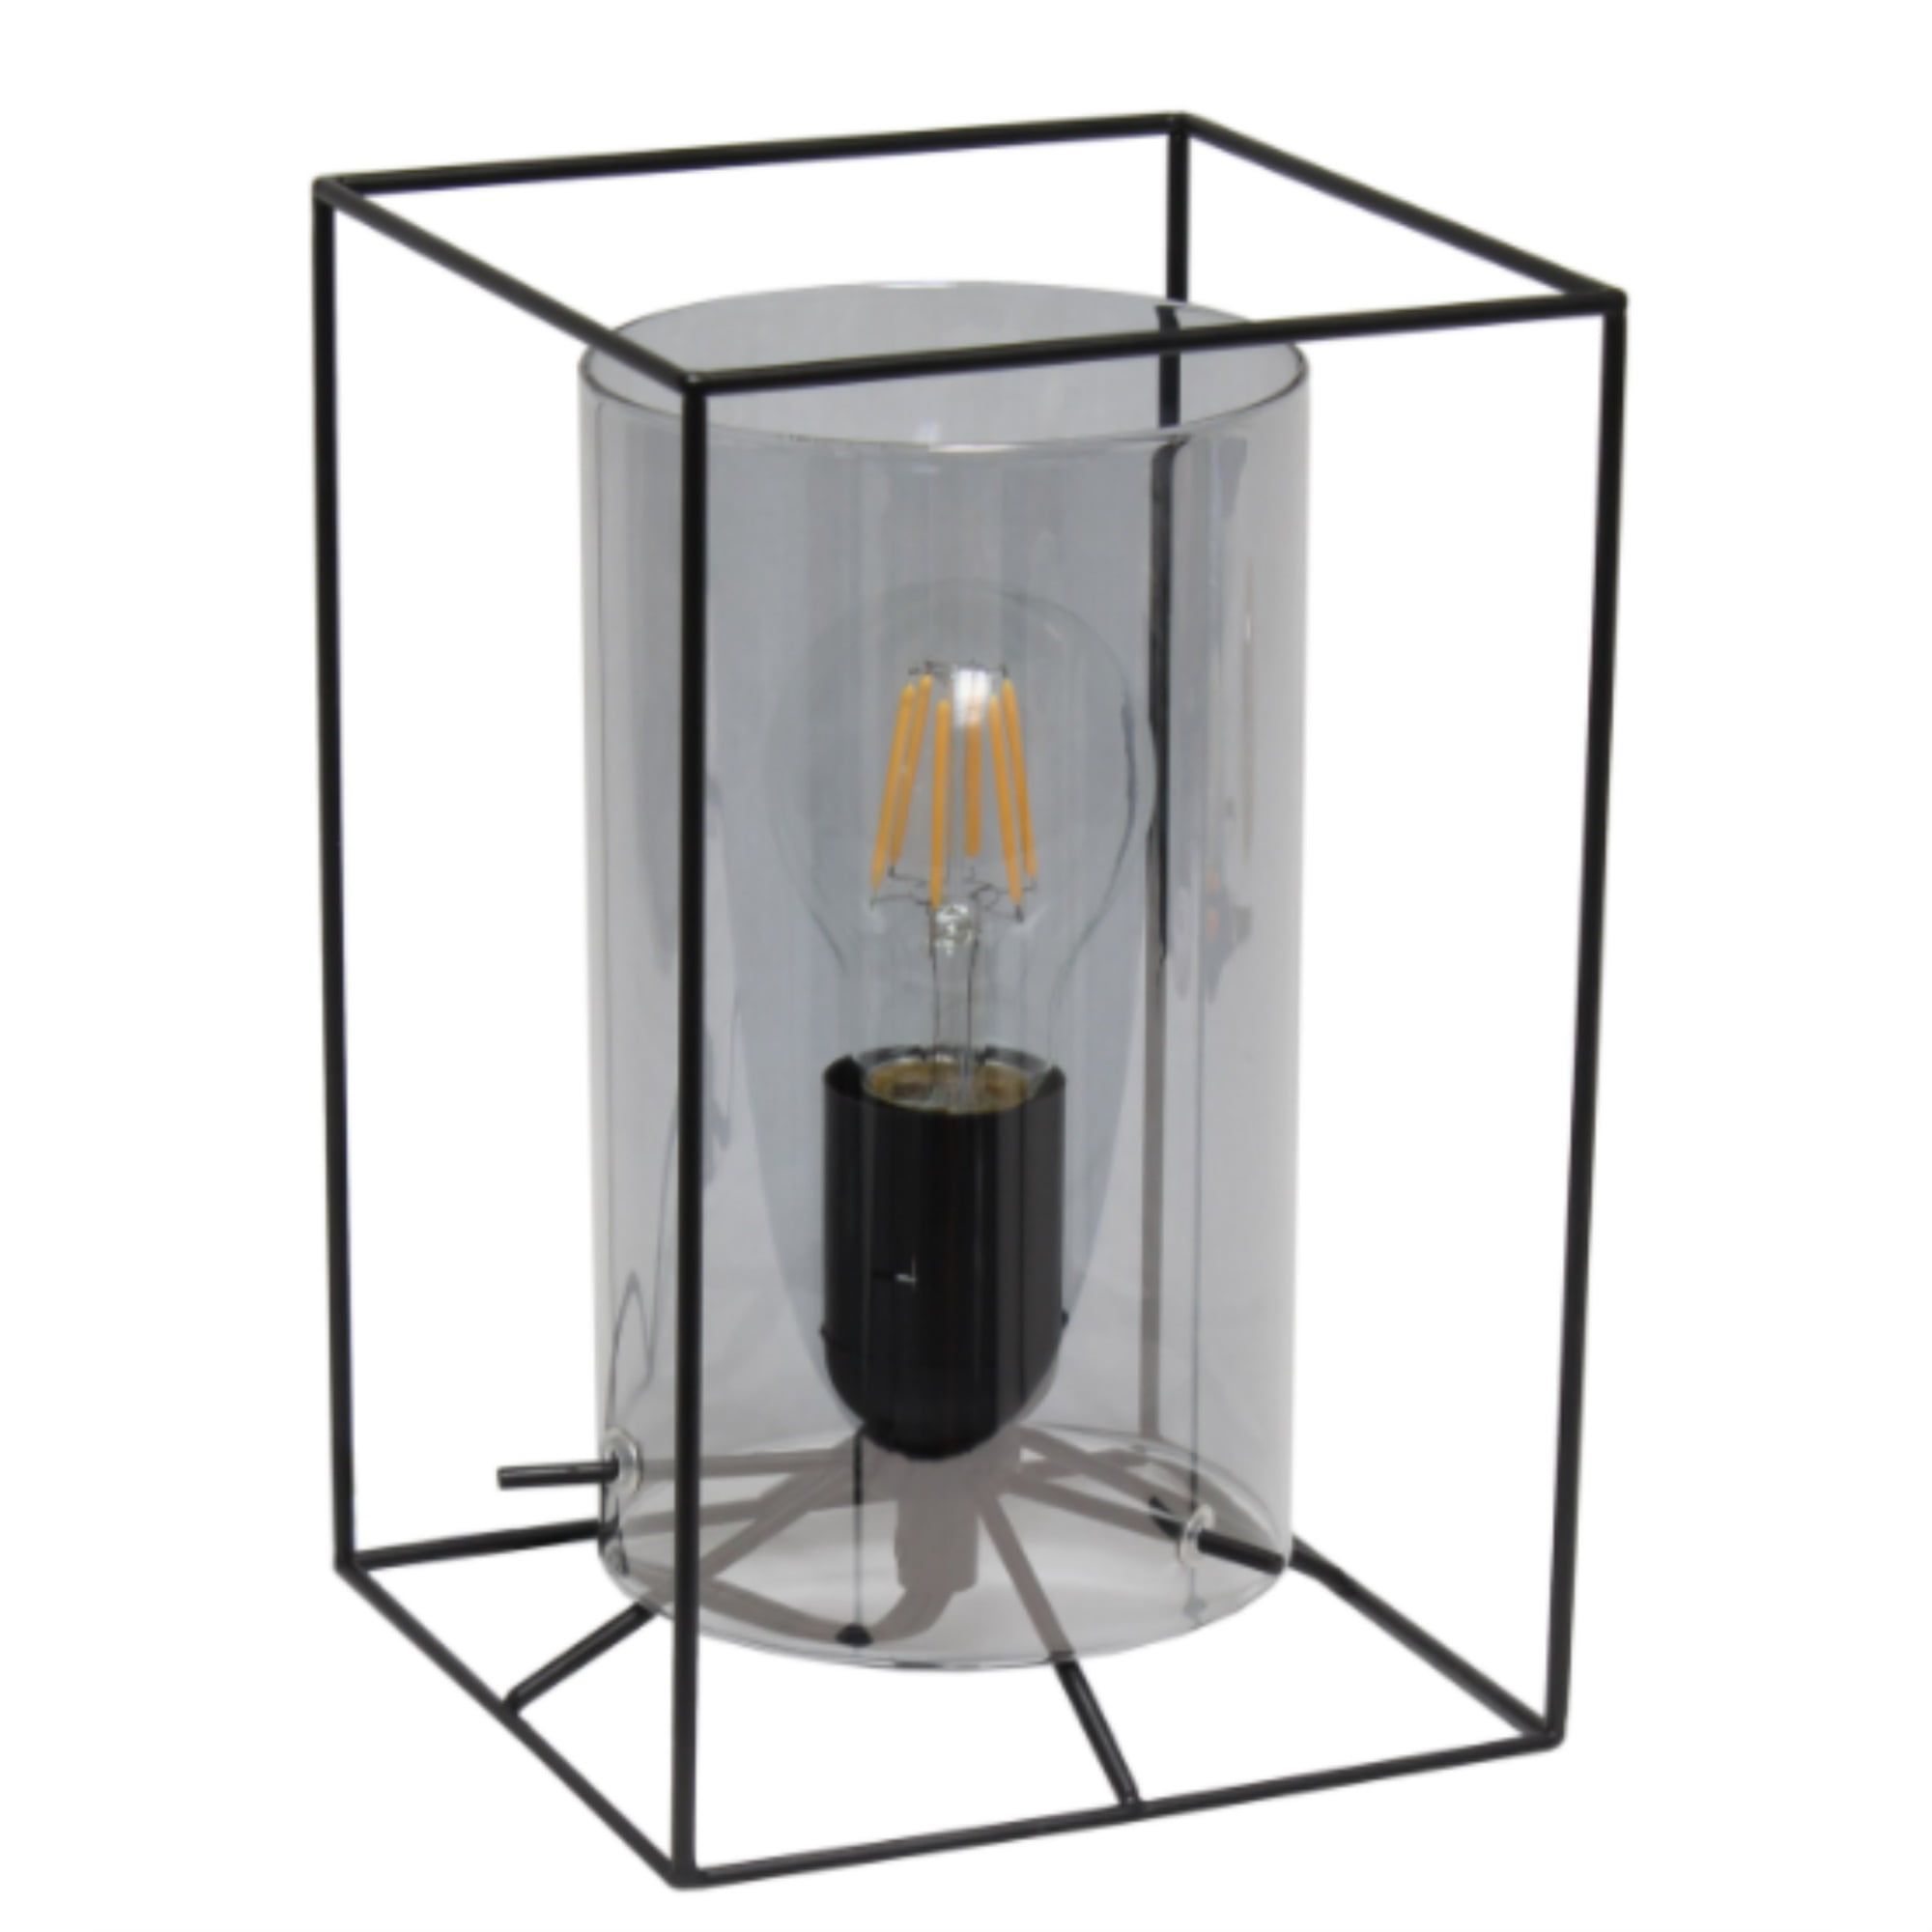  Lalia Home Black Framed Table Lamp with Smoked Cylinder Glass Shade, Small